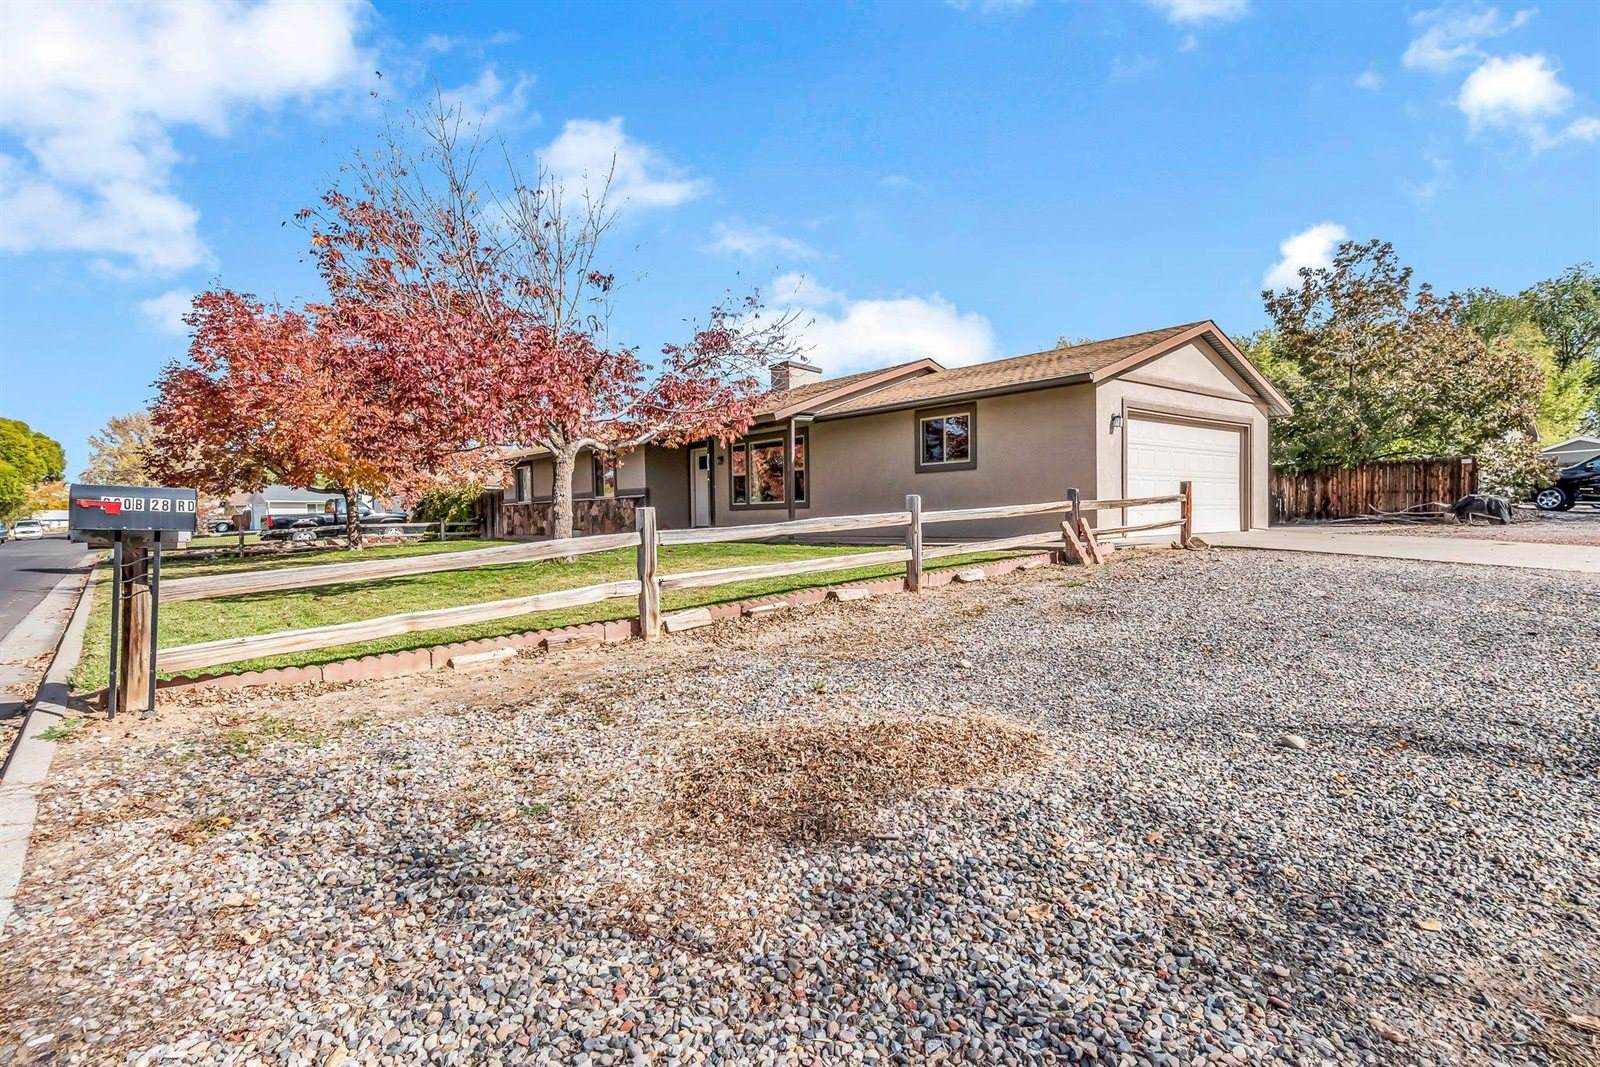 260 28 Road, #A, Grand Junction, CO 81503